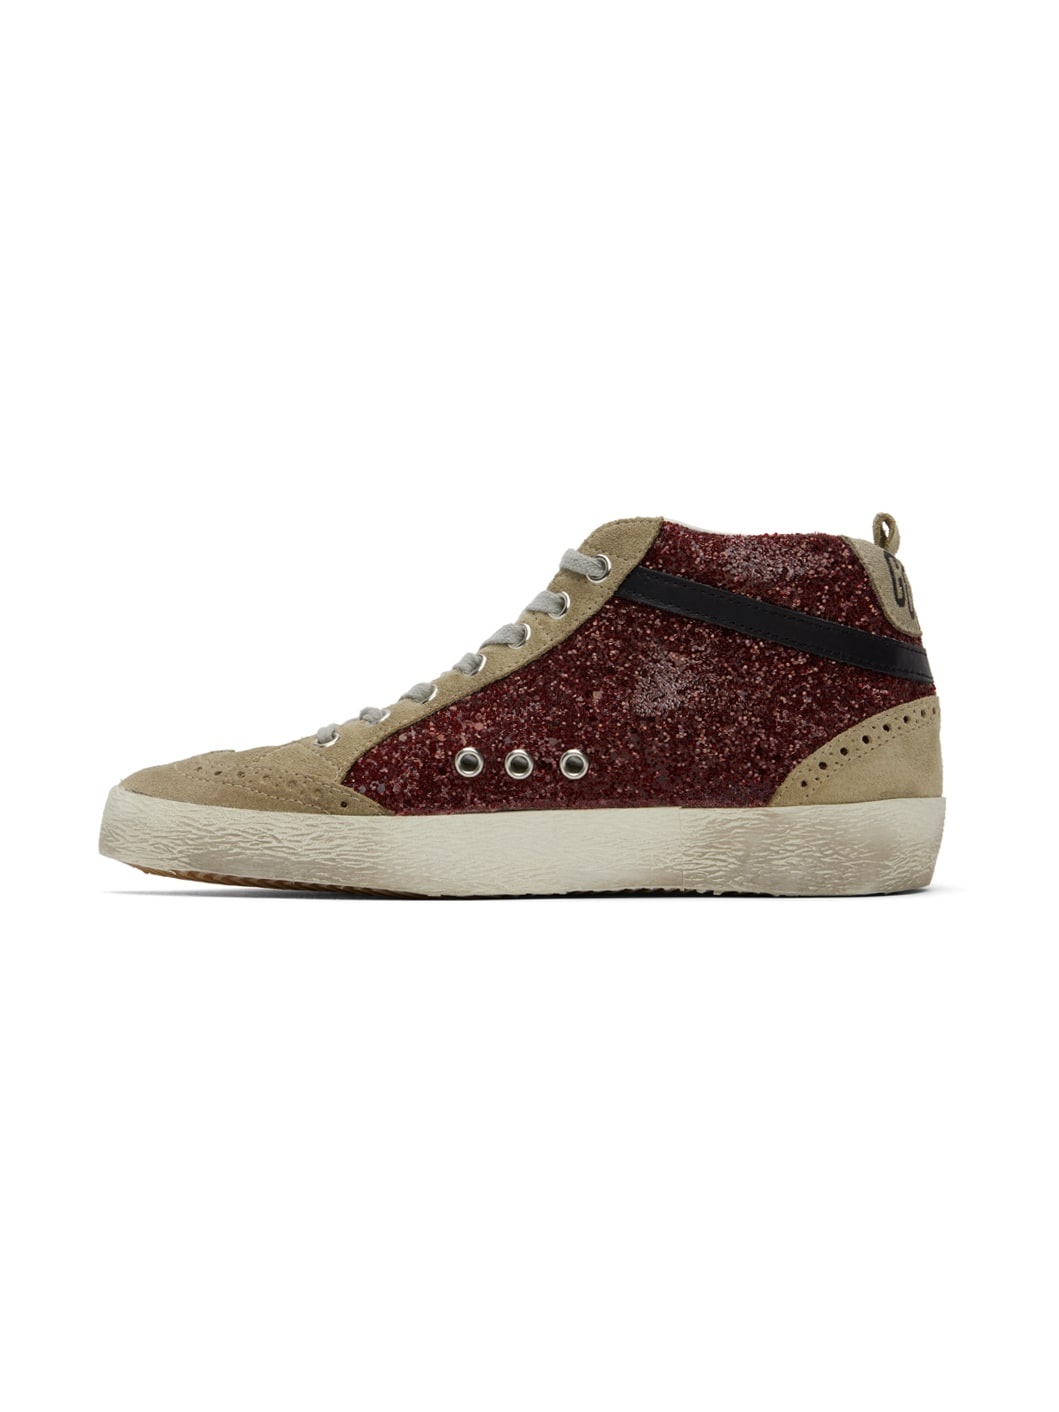 Taupe & Burgundy Mid Star Sneakers - 3